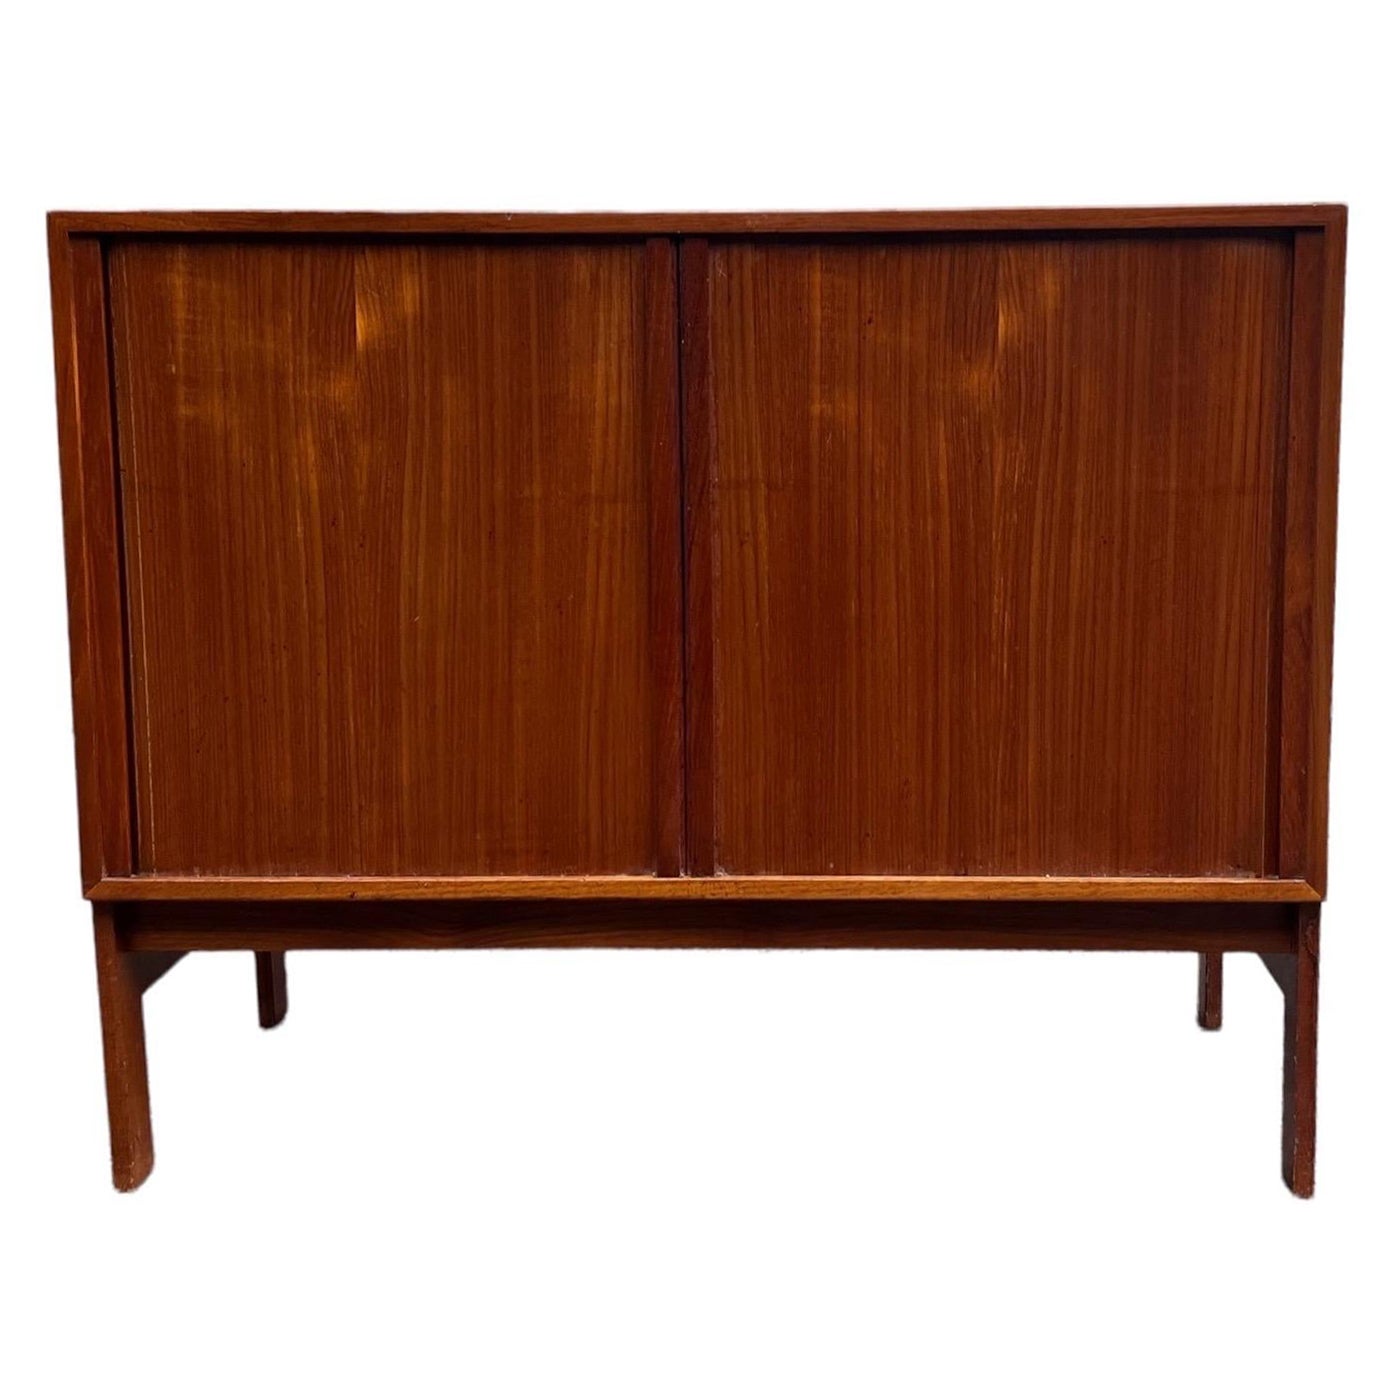 Vintage Danish Modern Tambour Door Record Cabinet of Credenza Imported For Sale